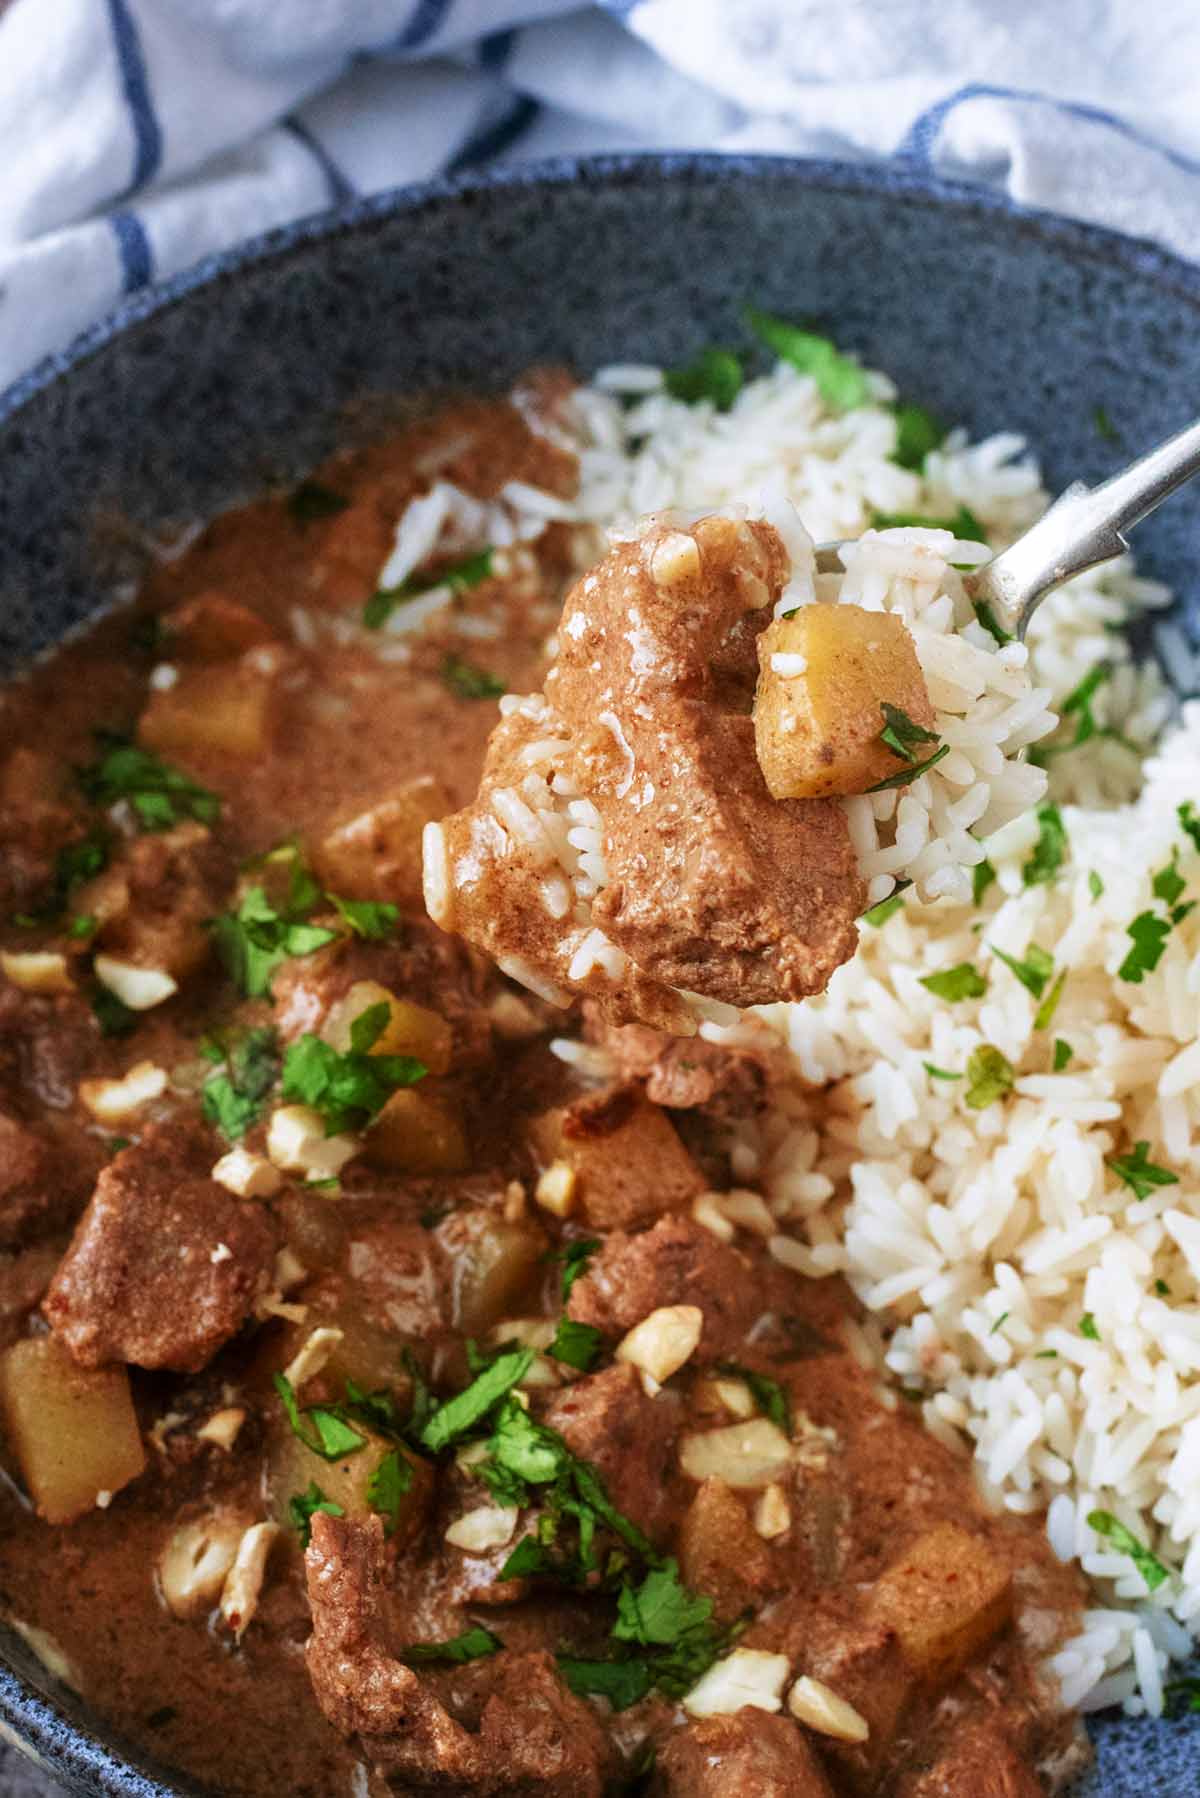 A fork lifting a chunk of beef from a curry.